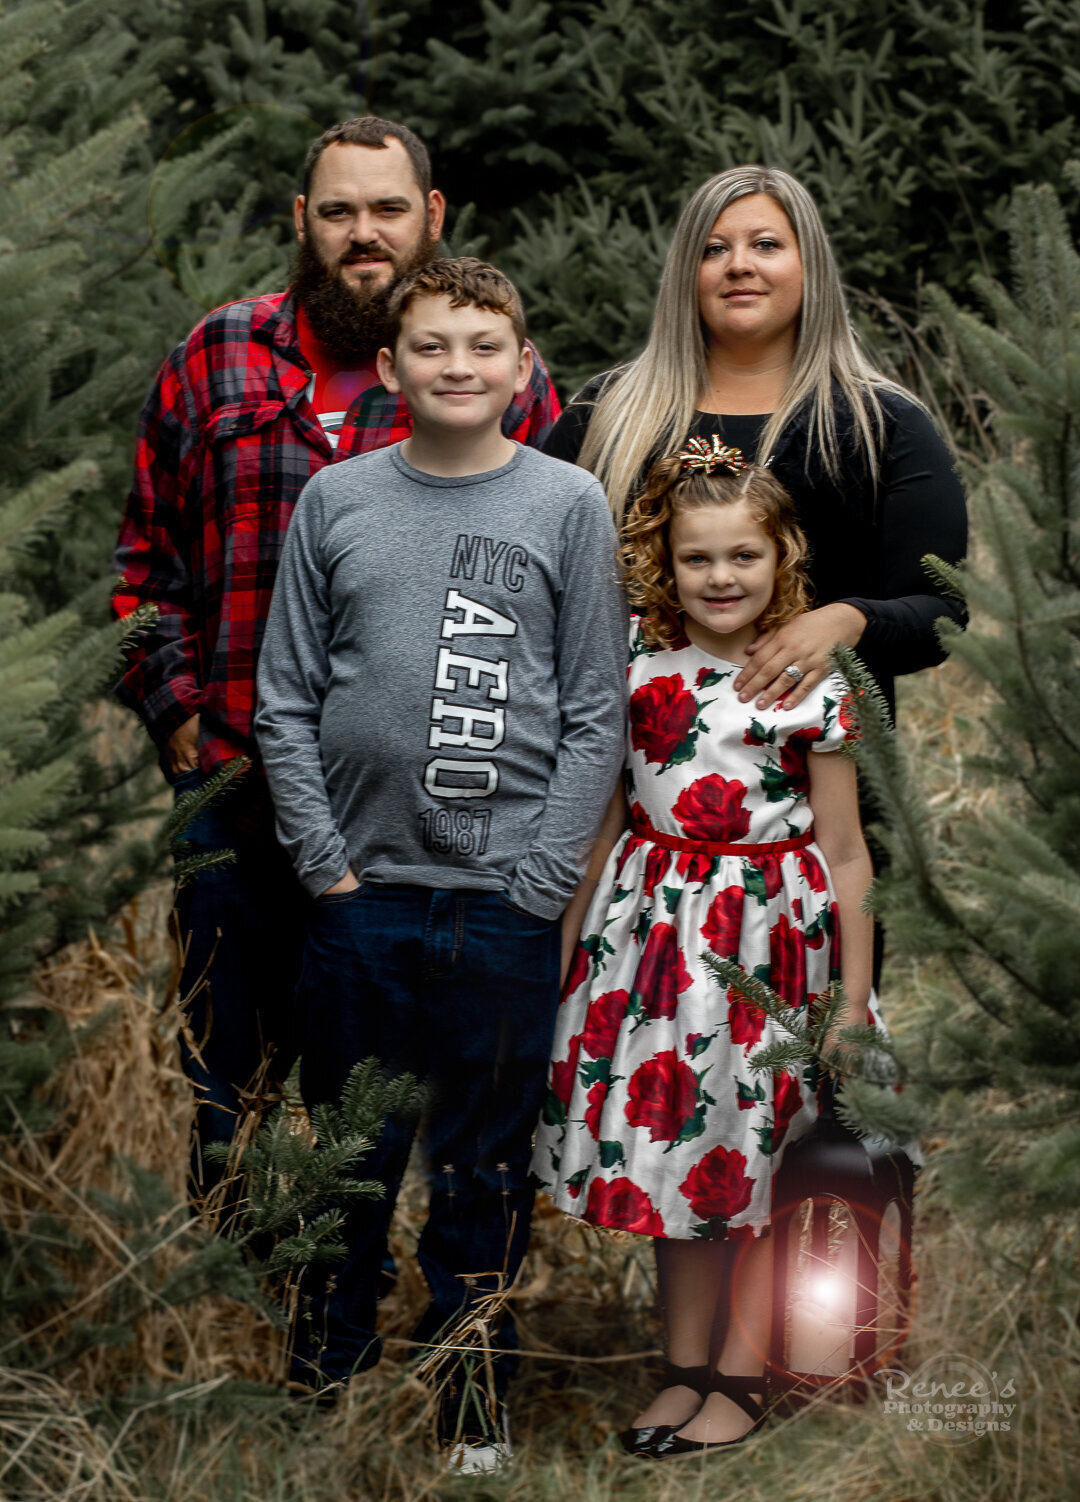 renees-photography-and-designs_christmas-tree-farm_family-children-photoshoot_new-river-valley_blue-ridge-mountains-sm-2